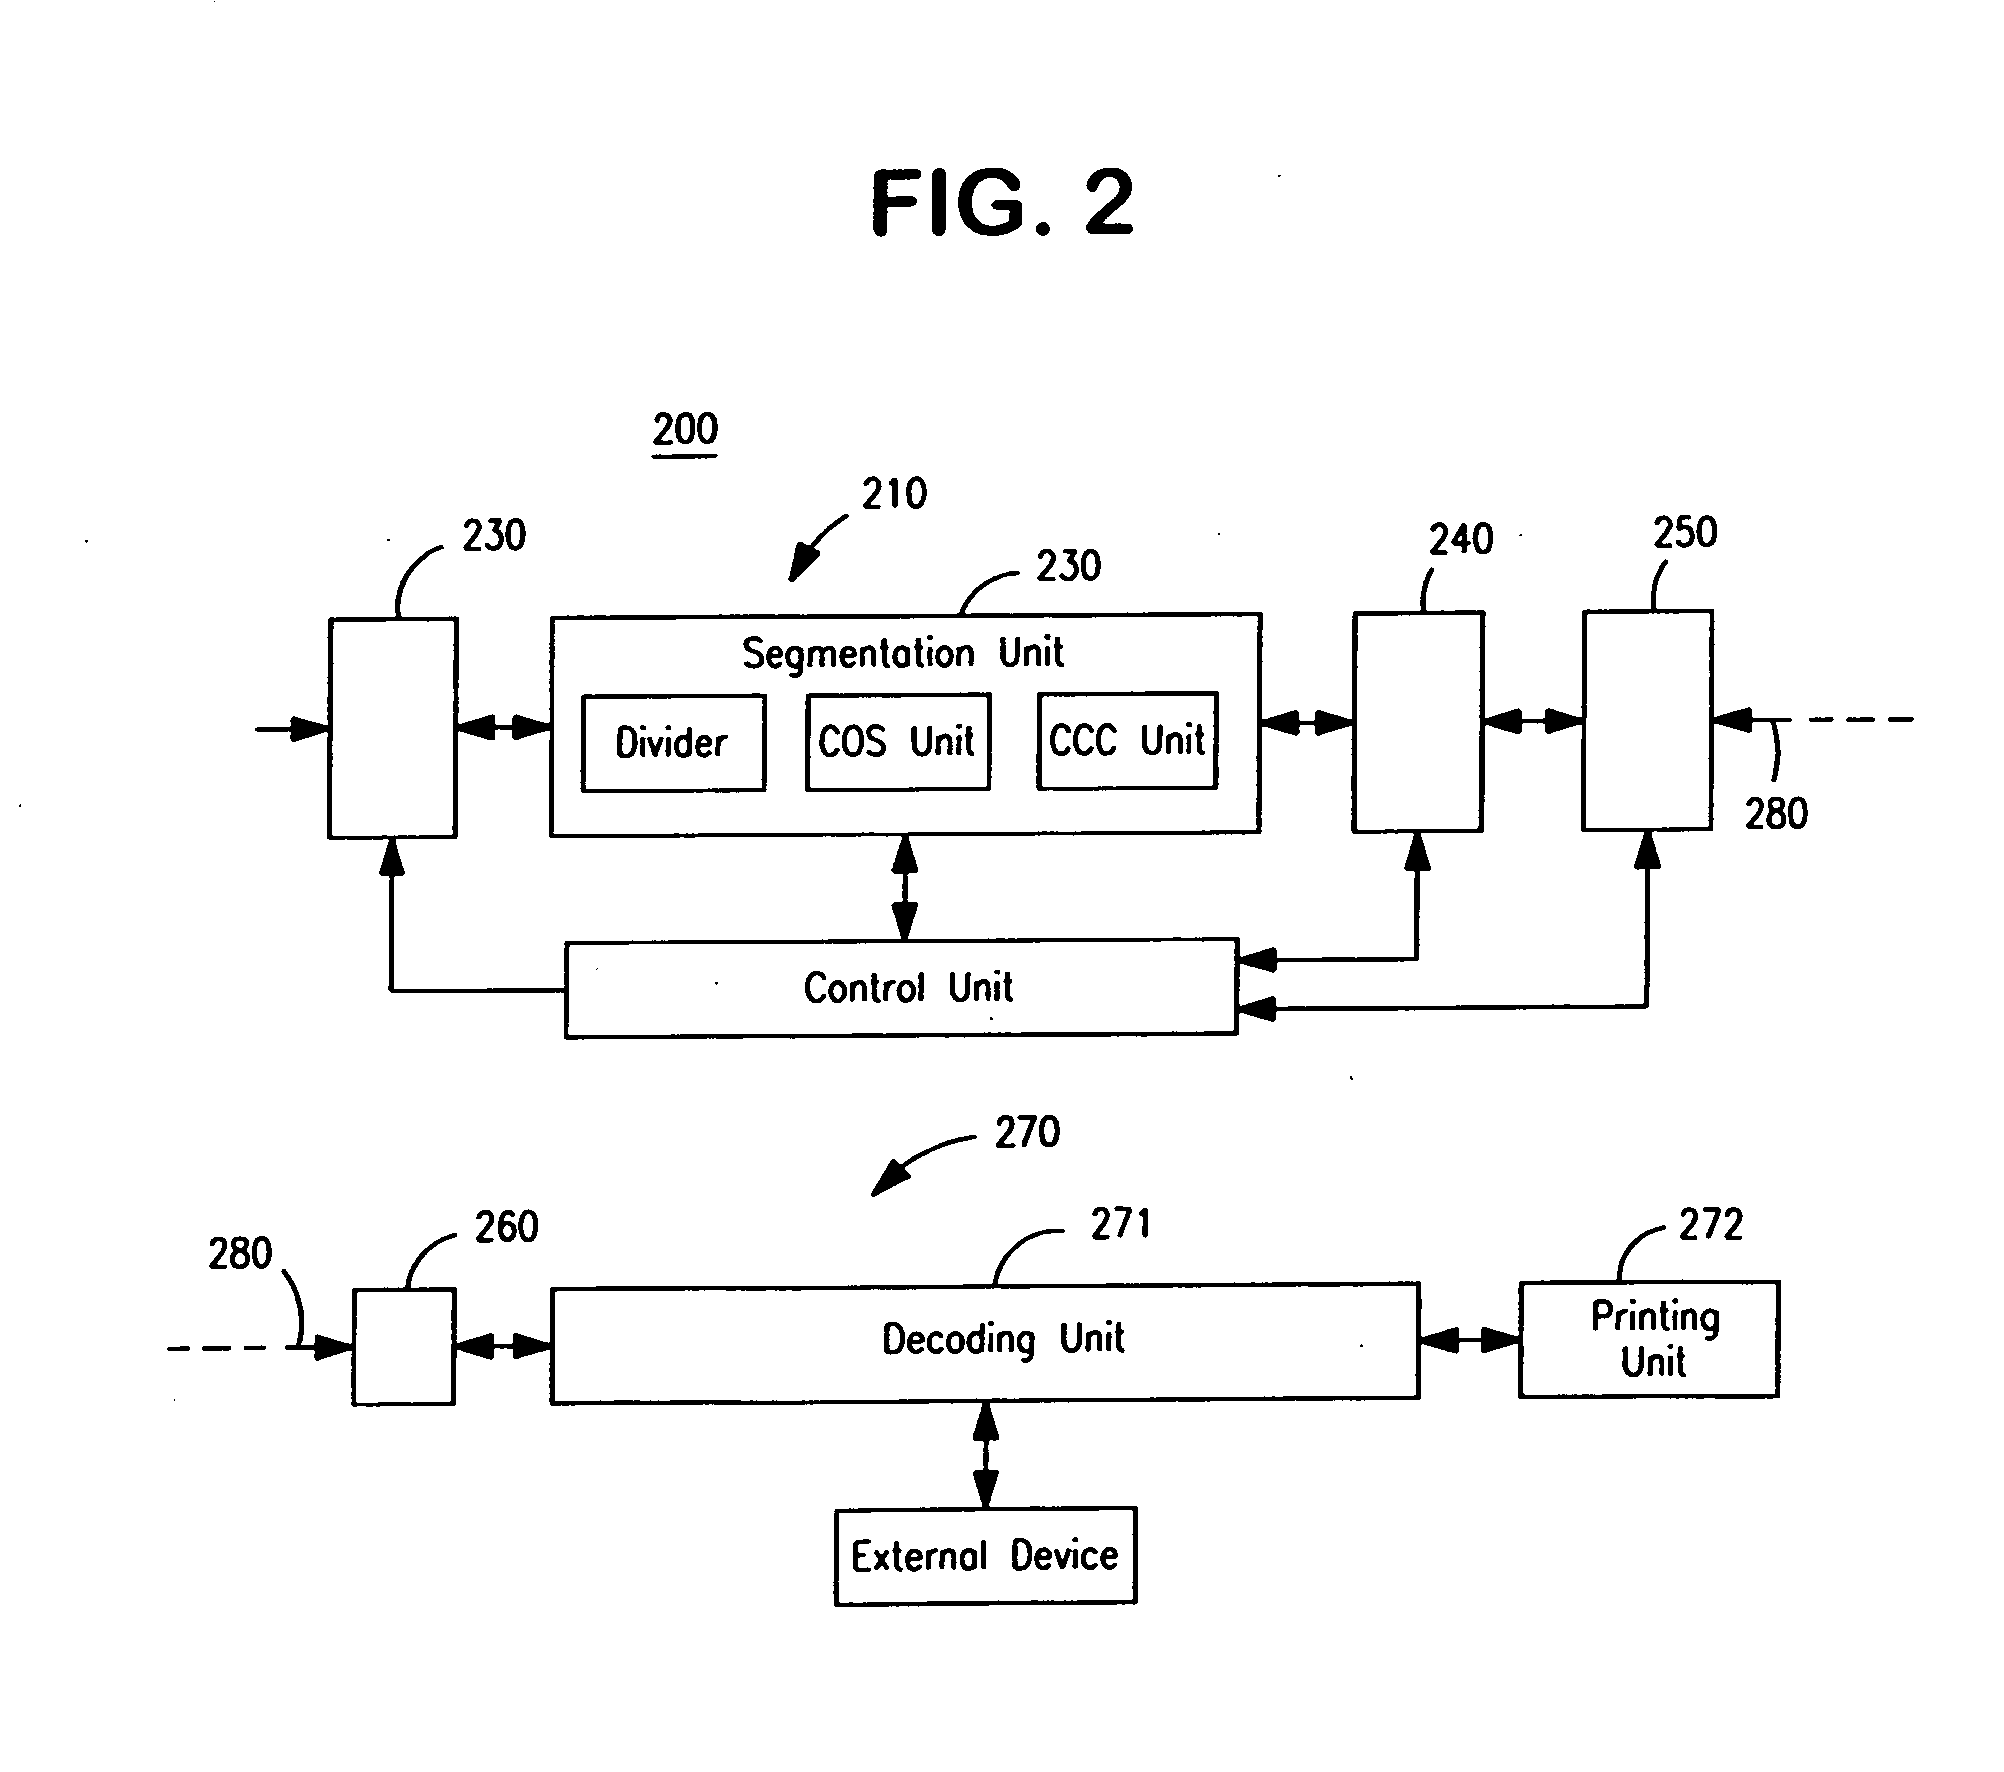 Apparatus and method of segmenting an image and/or receiving a signal representing the segmented image in an image coding and/or decoding system